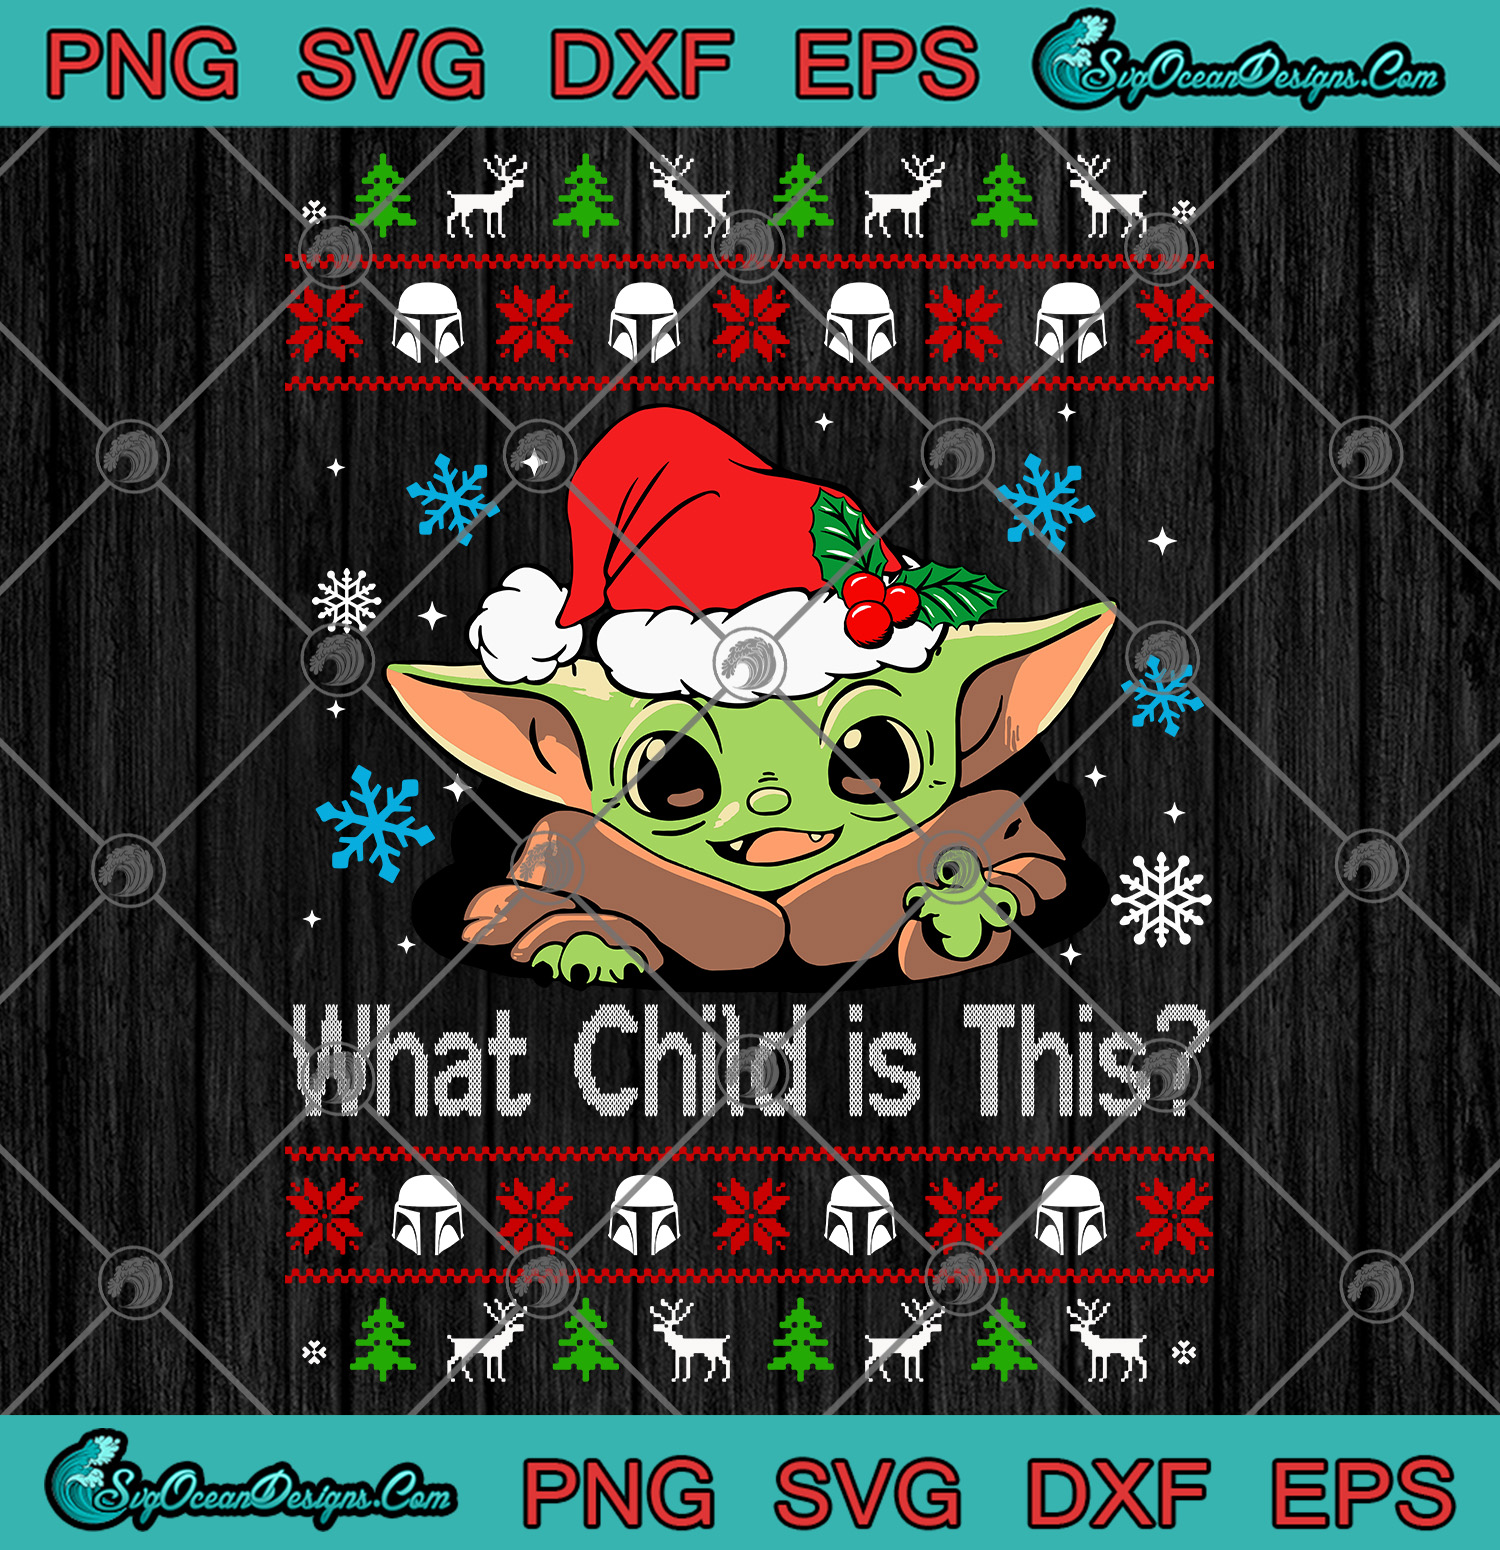 Download What Child Is This Baby Yoda Christmas The Mandalorian Svg Png Eps Fxf Cut File Clipart Designs Digital Download